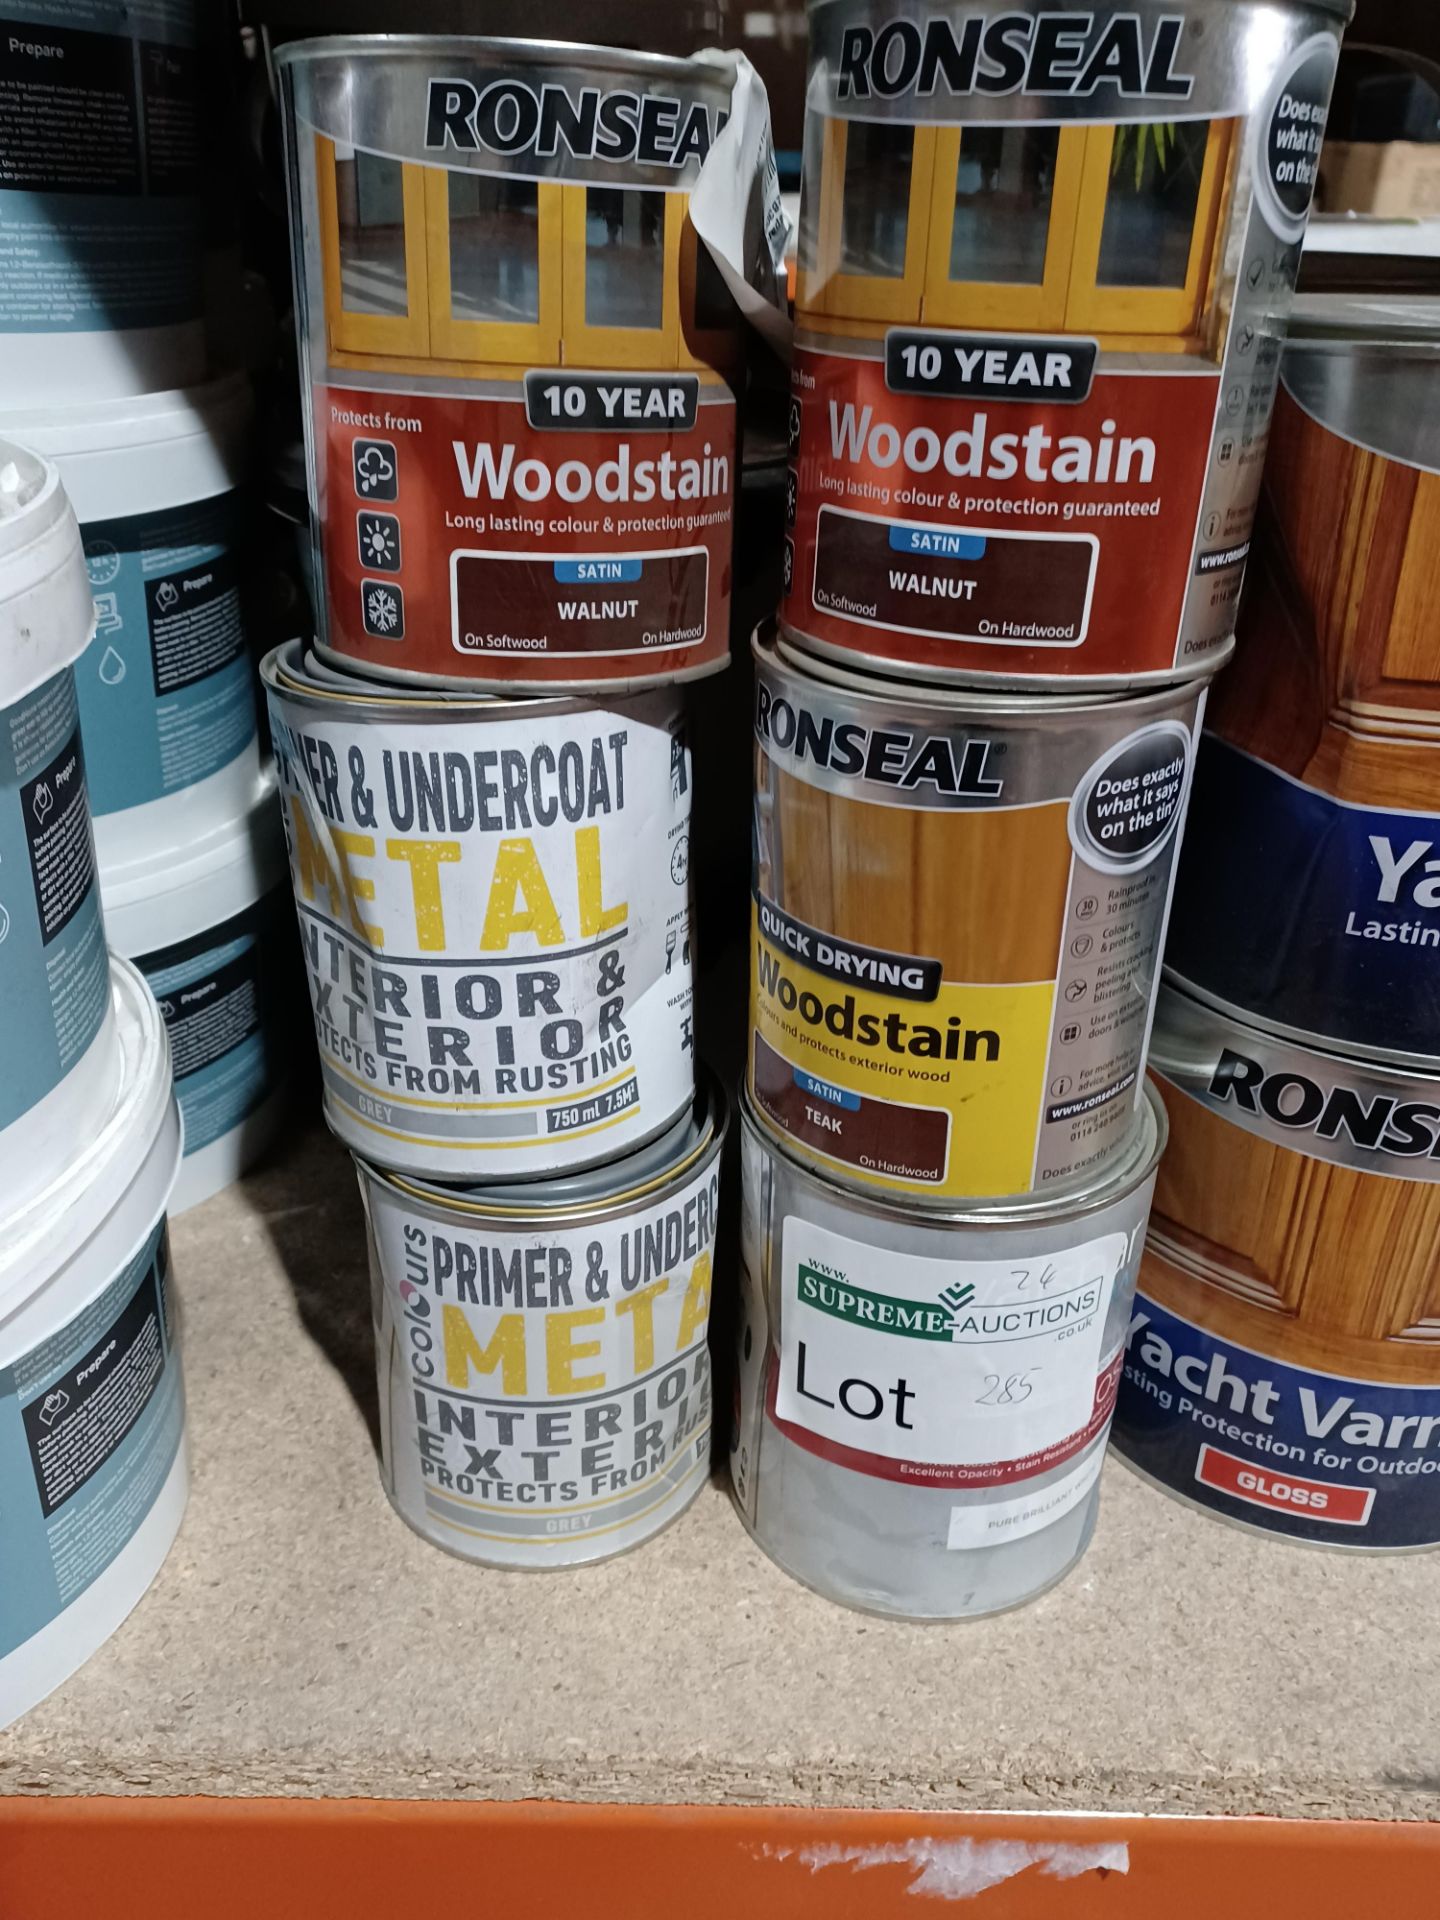 6 X MIXED 750ML LOT INCLUDING RONSEAL WALNUT, VALSPAR AND MORE - PCK